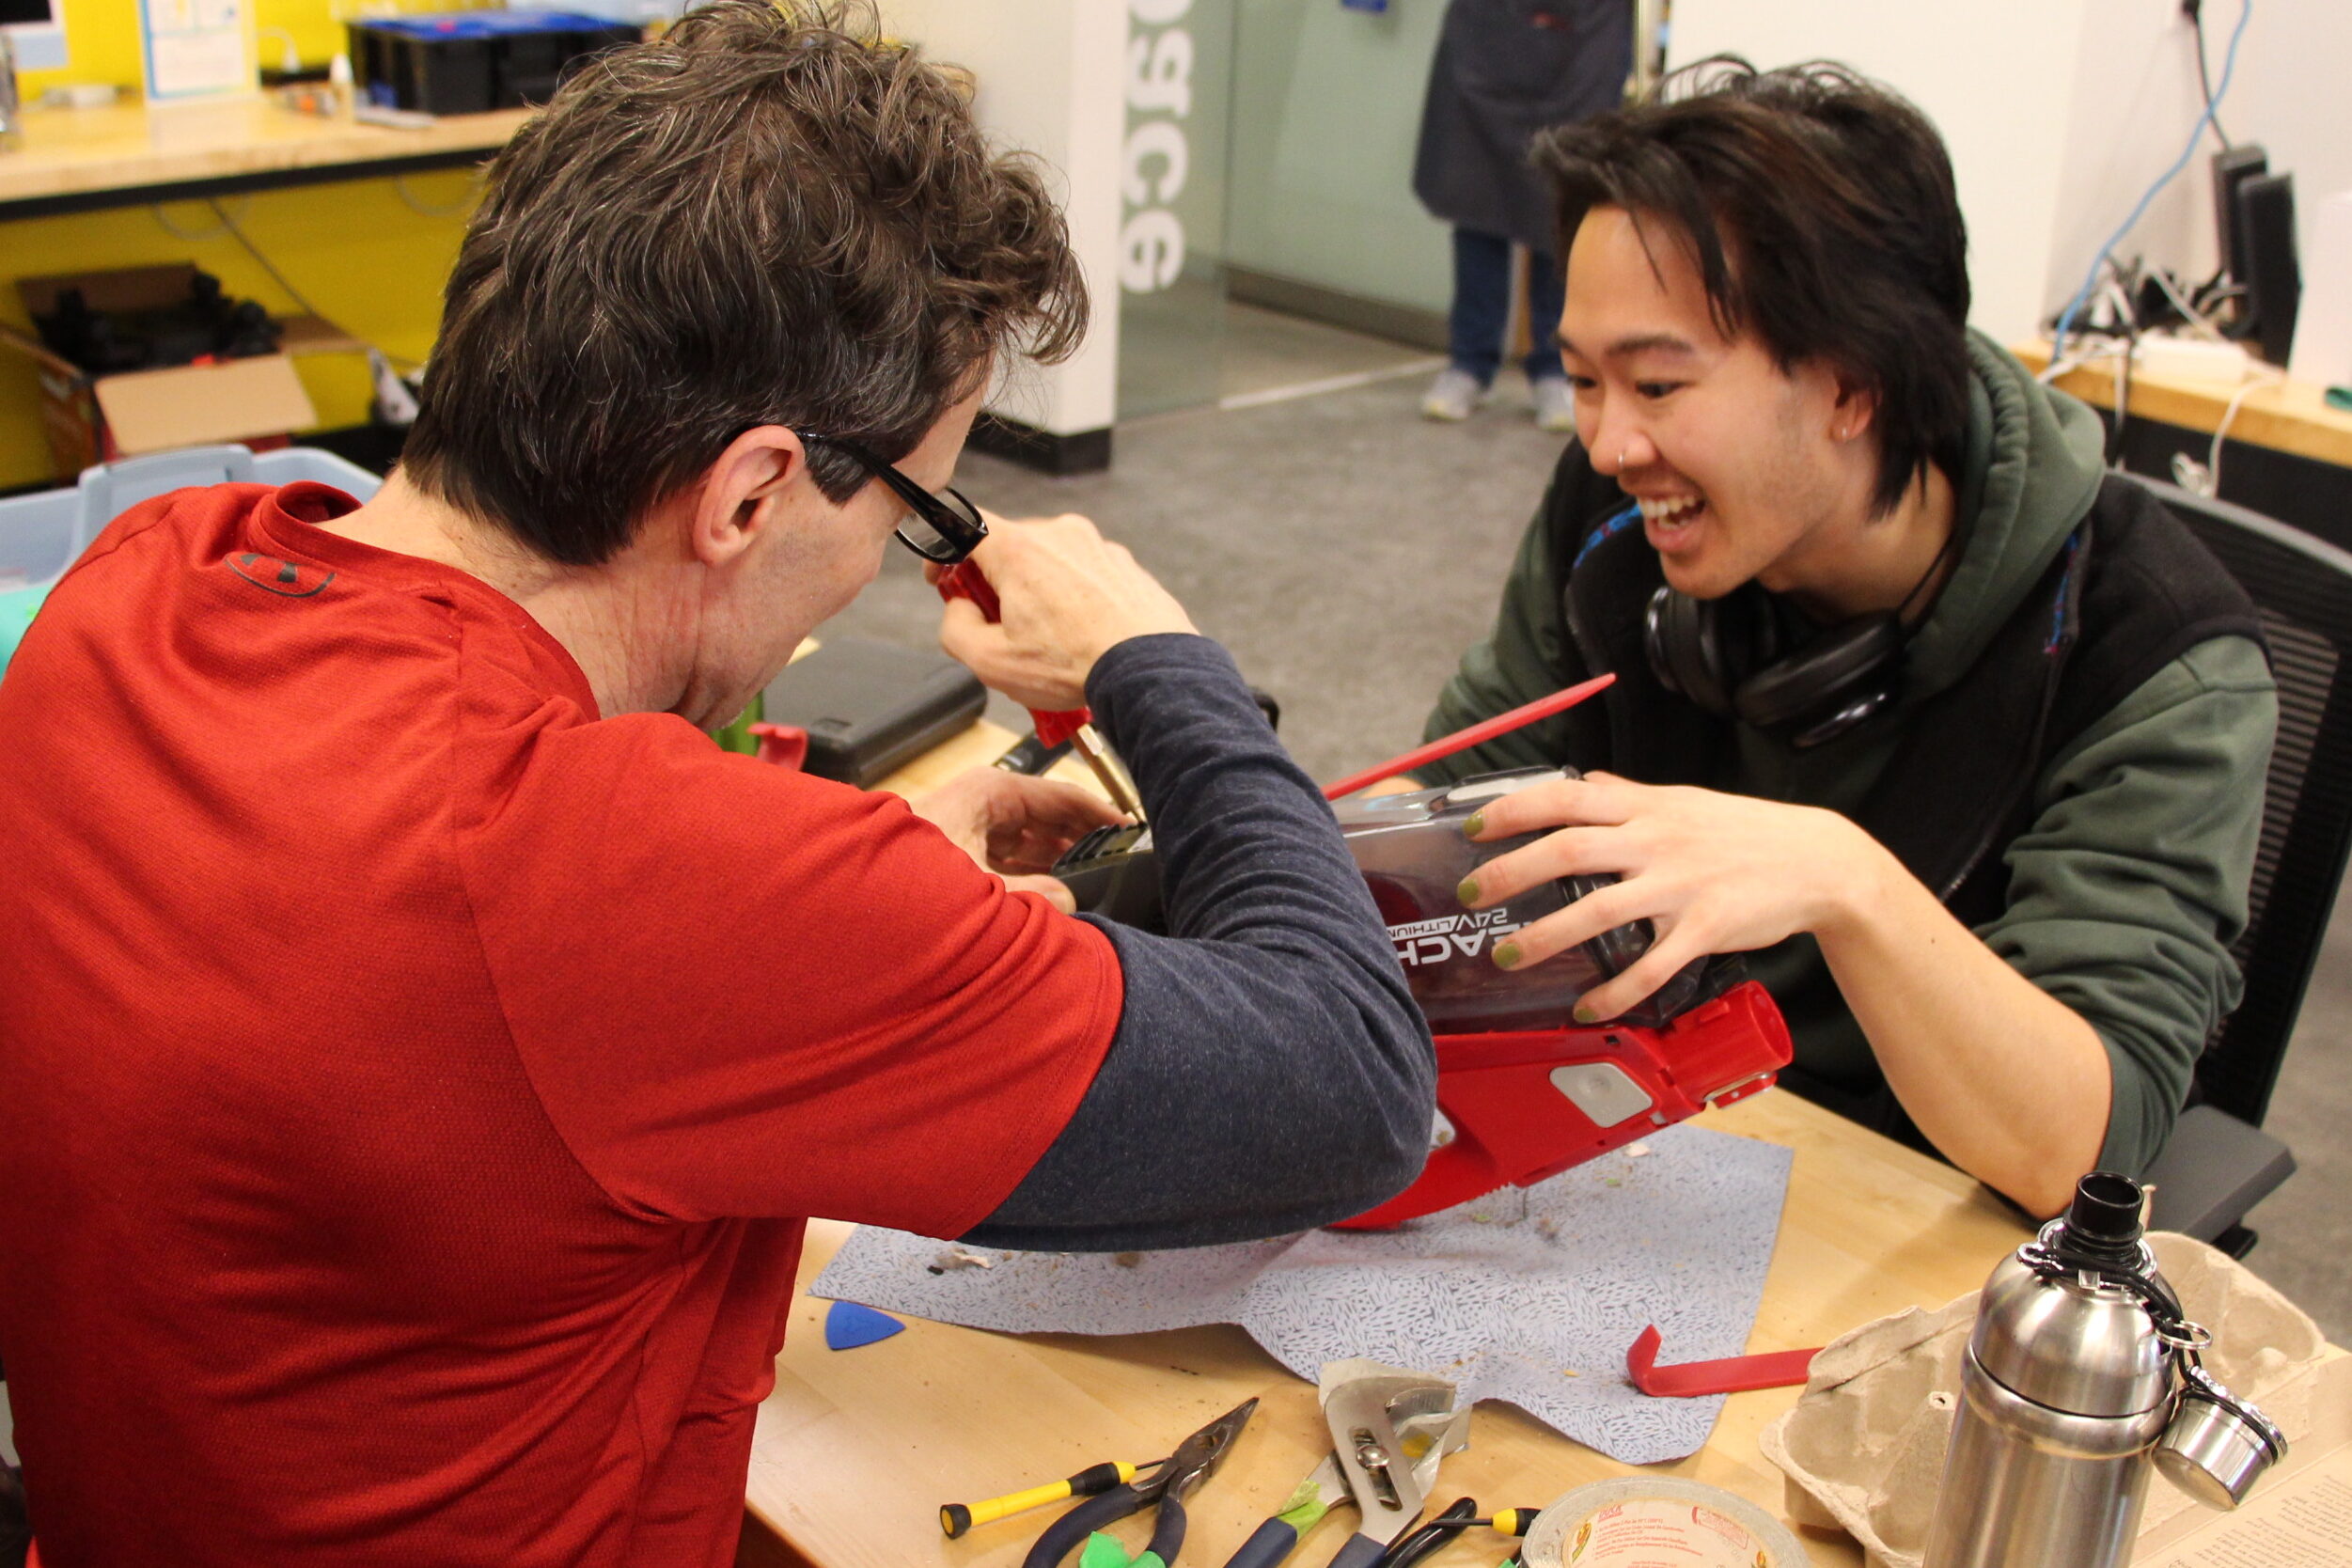 A volunteer helps a student during a Repair Café event